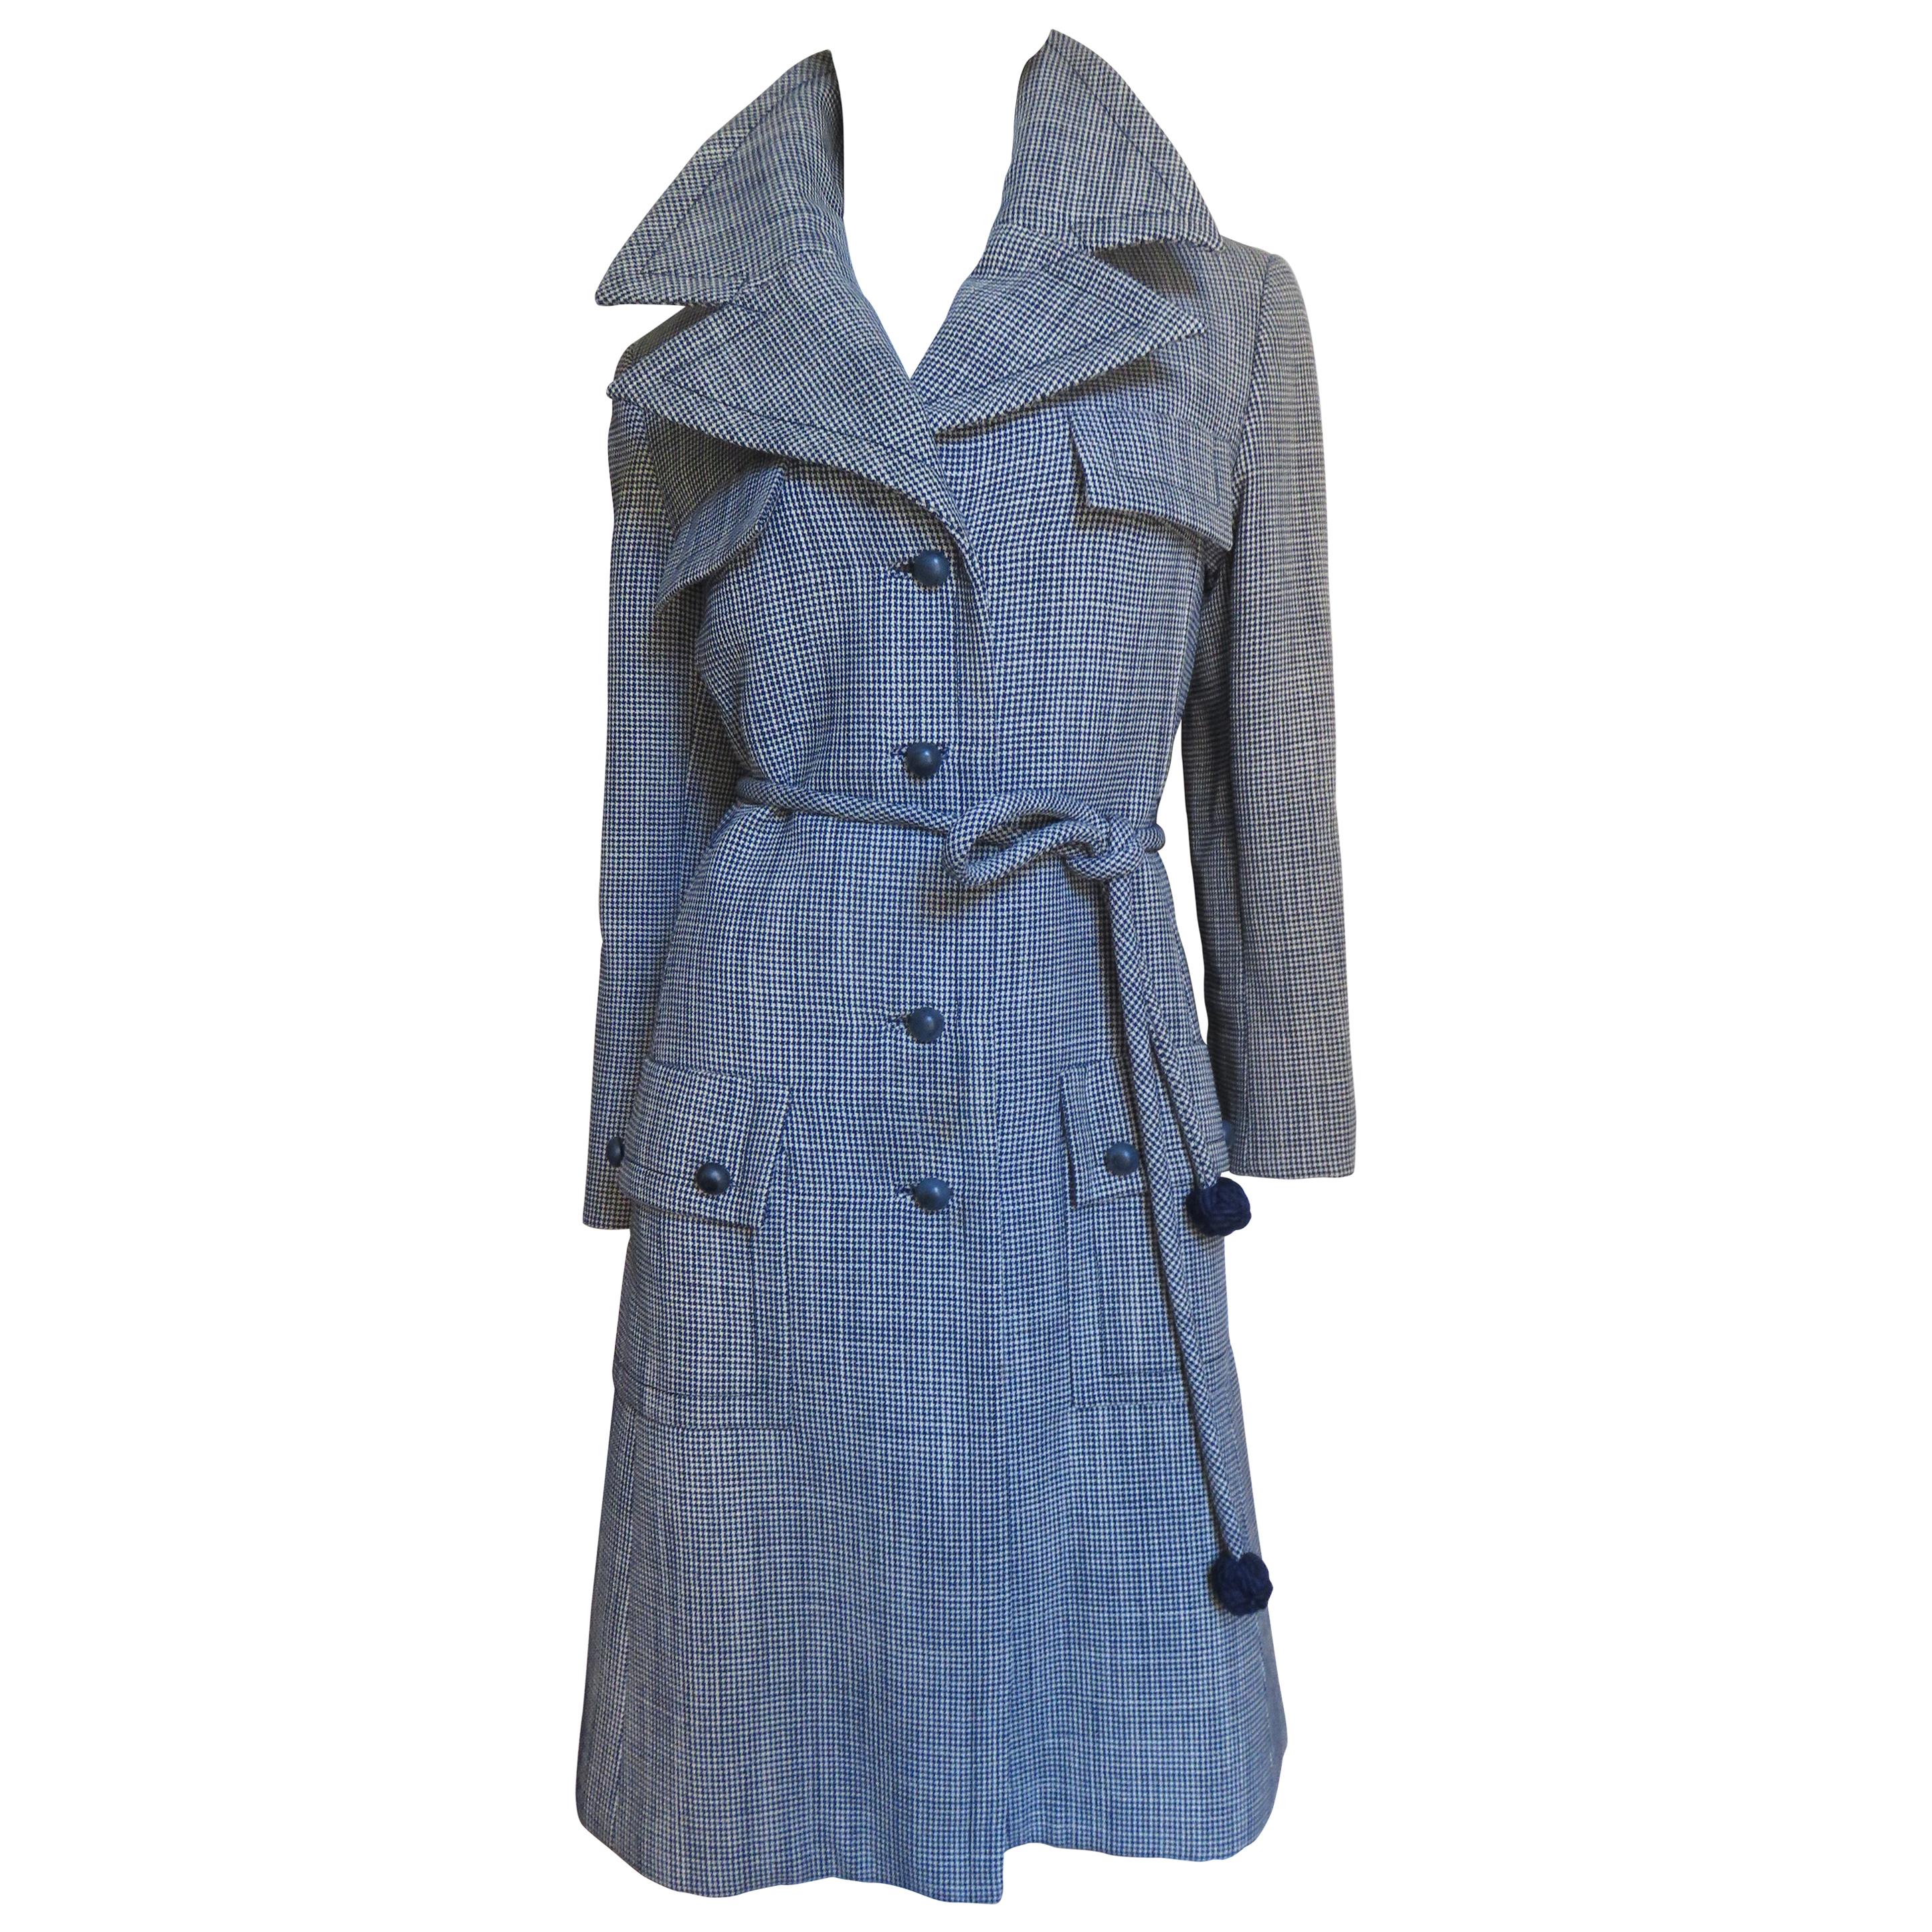 Christian Dior Houndstooth Coat 1950s